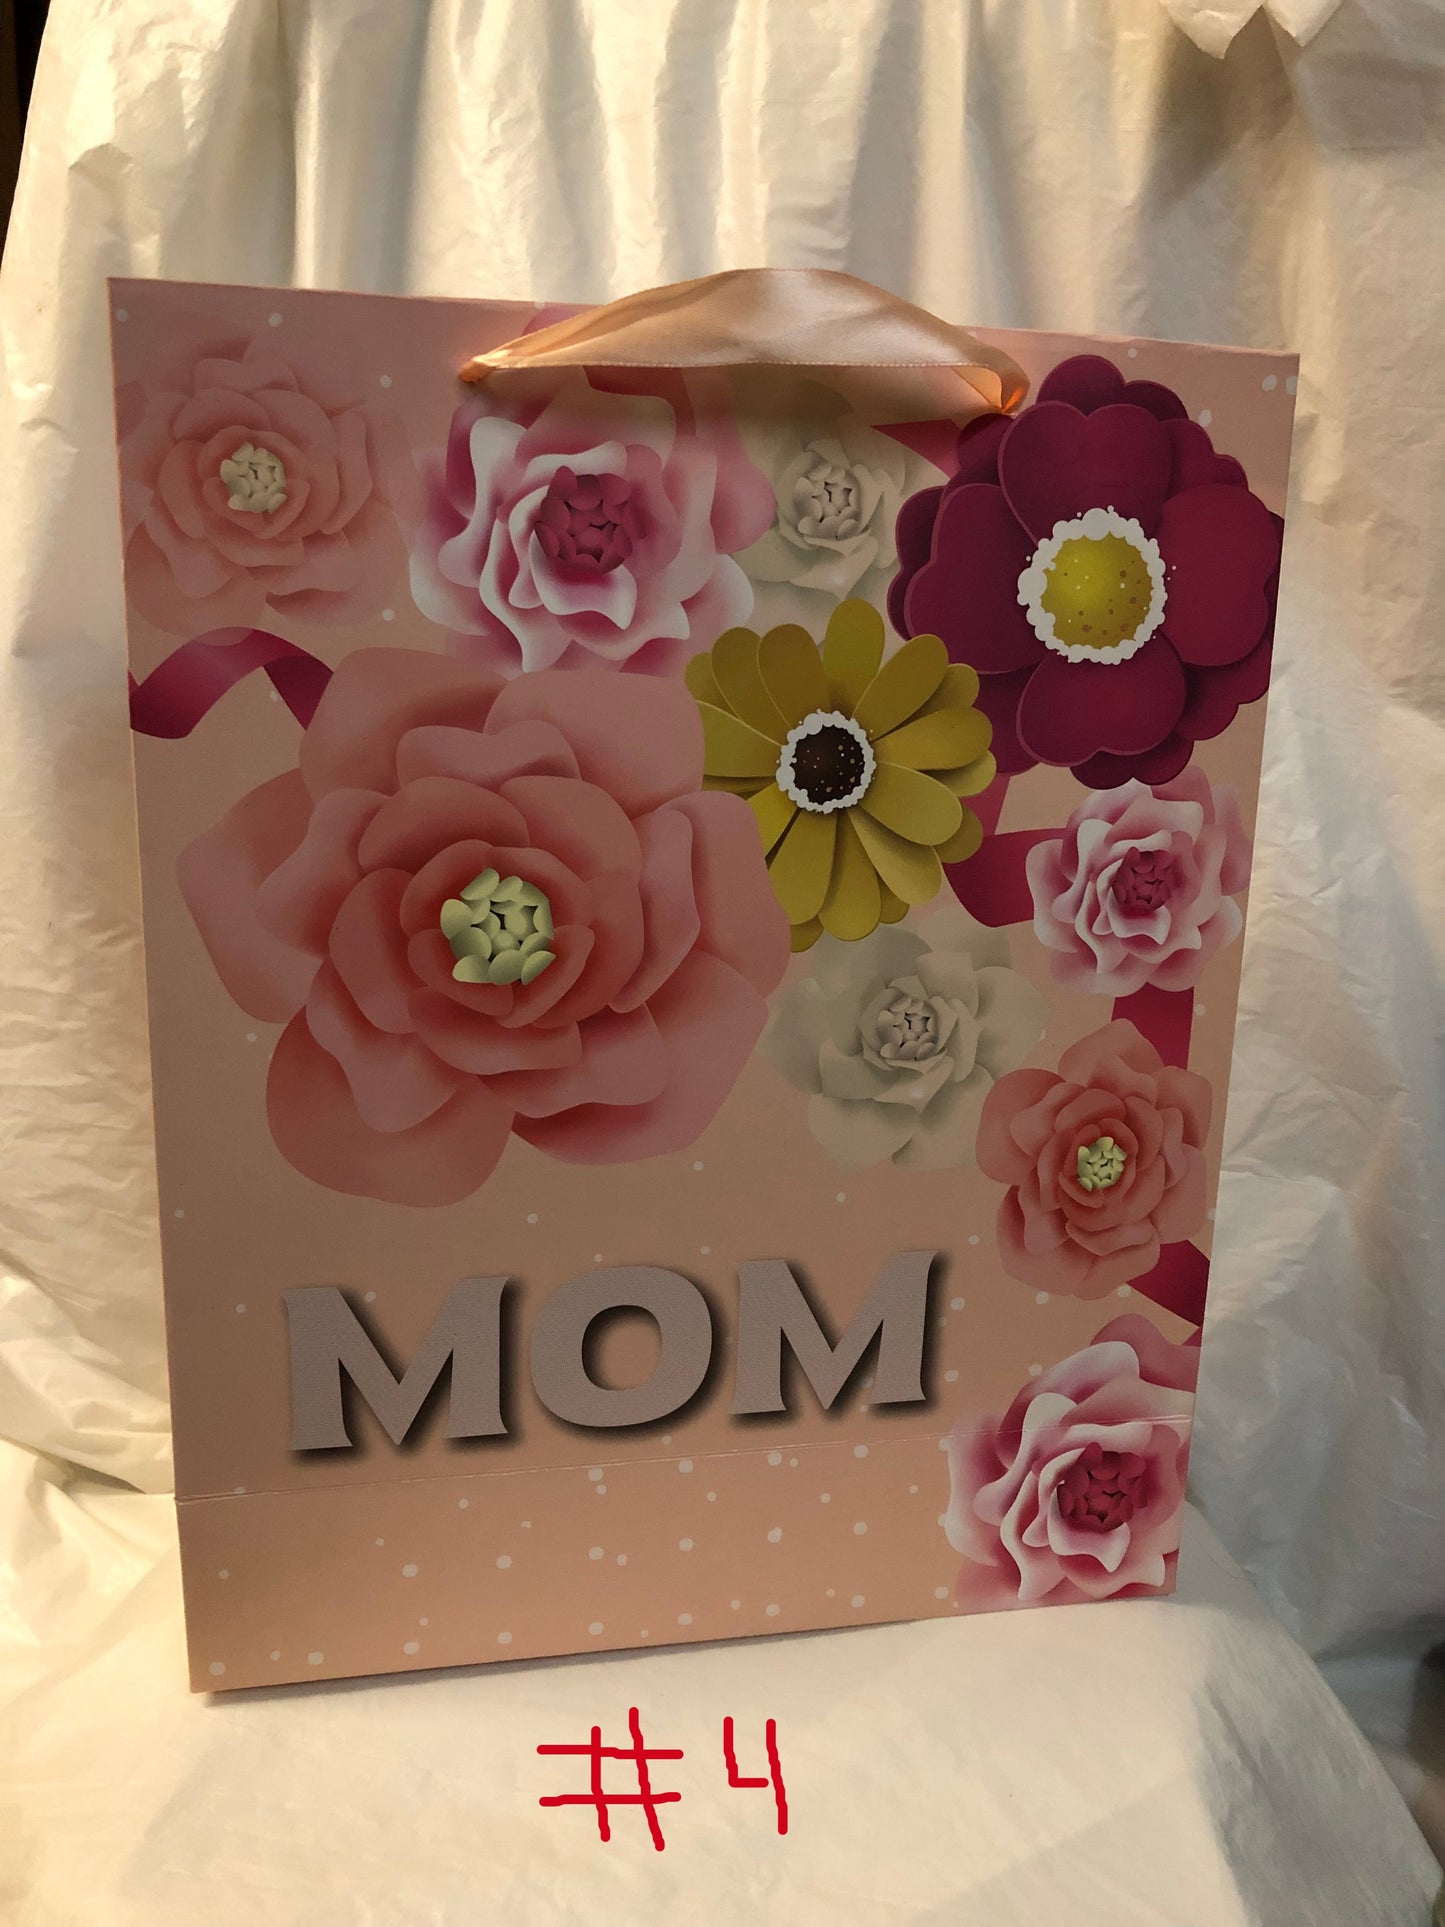 Assorted Floral Pop Out Glitter Gift Bags For Mother's Day 13.21 Or 2 For $20.00 "New Arrival"